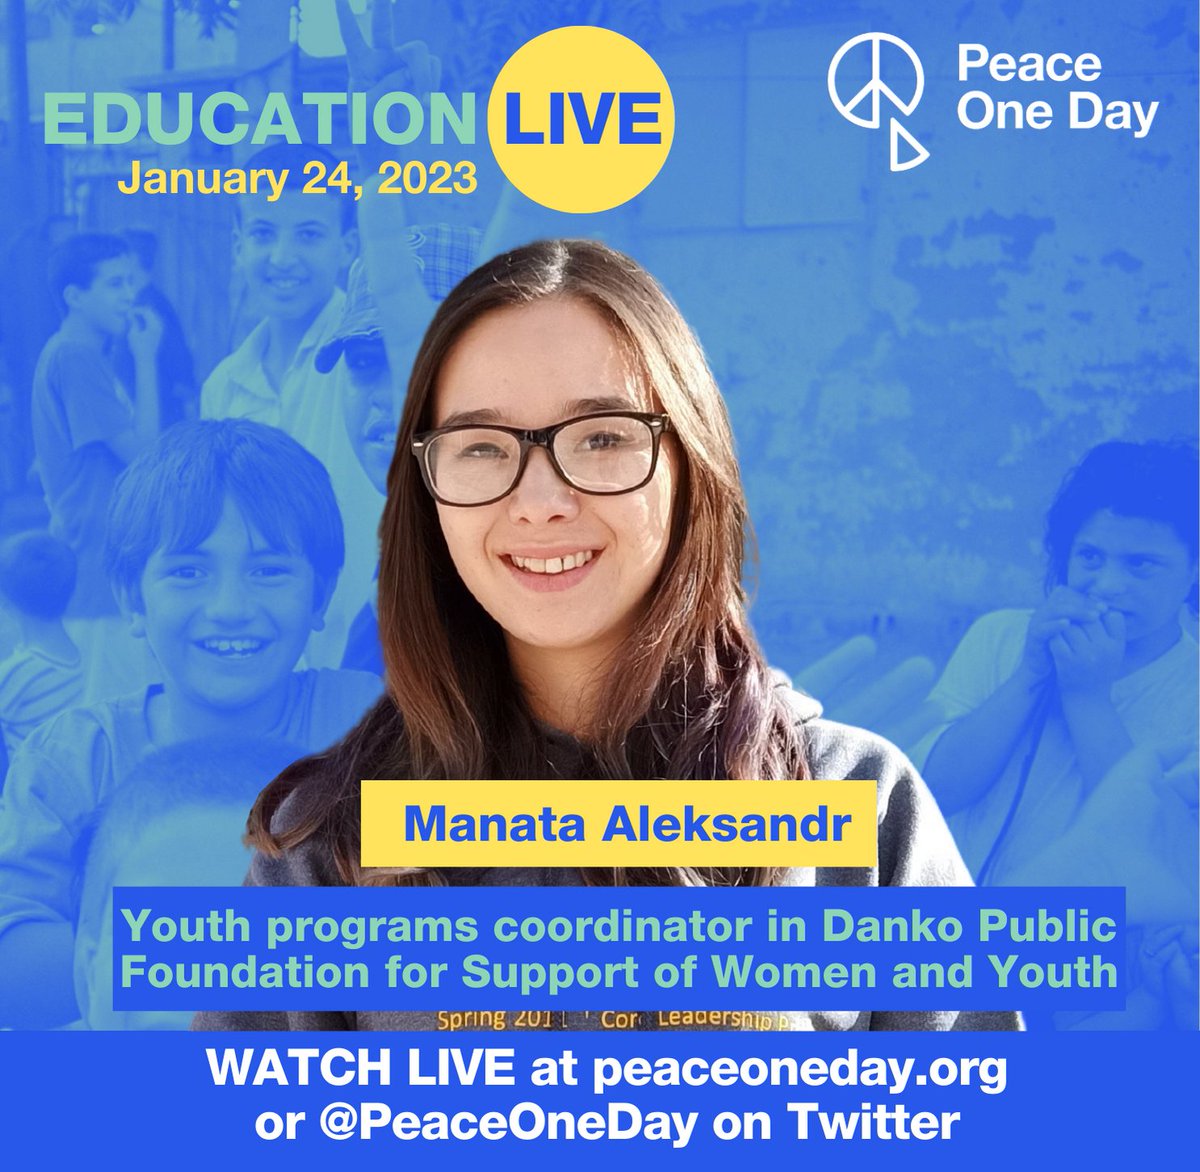 Peace One Day is pleased to announce that Manata Aleksandr will be joining us for Education Live 24 January. Follow our social media for announcements, and visit peaceoneday.org or @PeaceOneDay on Twitter to watch the broadcast and register for more information.